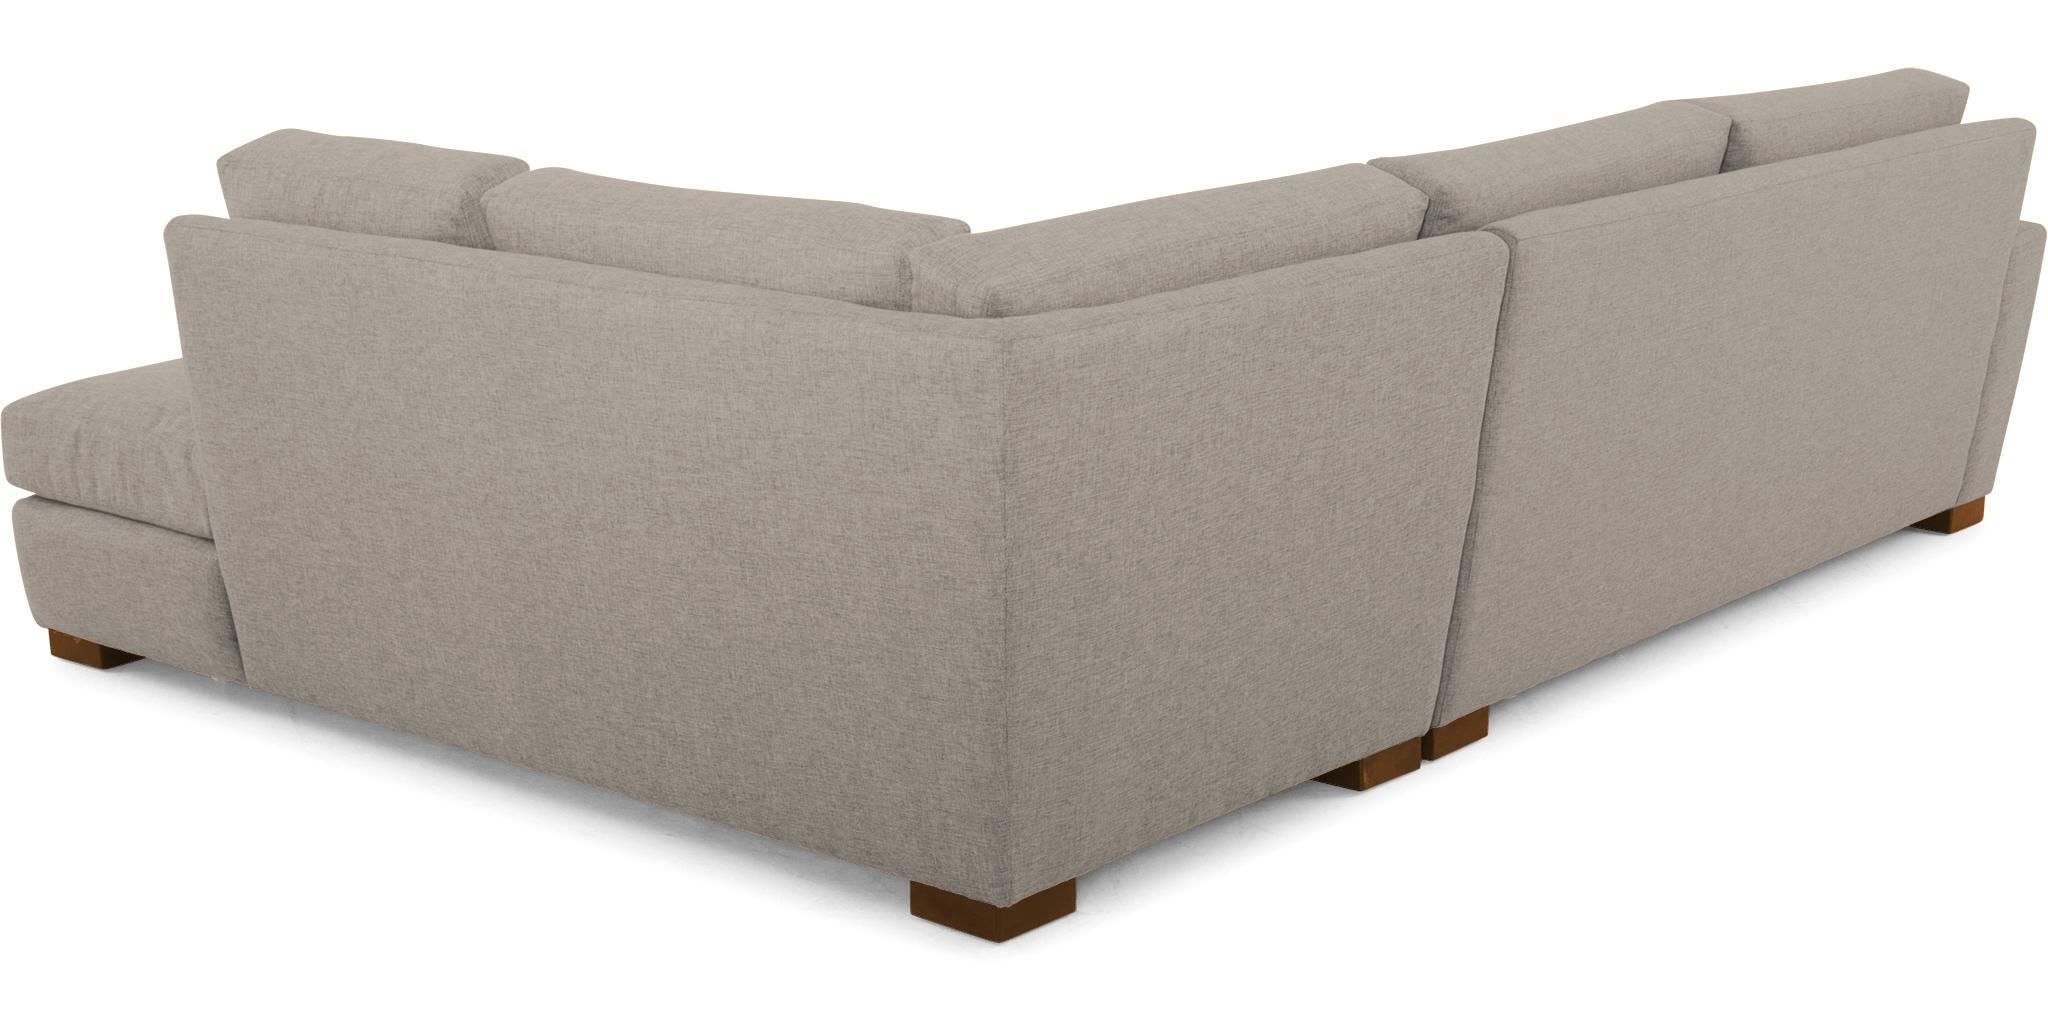 Gray Anton Mid Century Modern Sectional with Bumper - Prime Stone - Mocha - Right  - Image 4